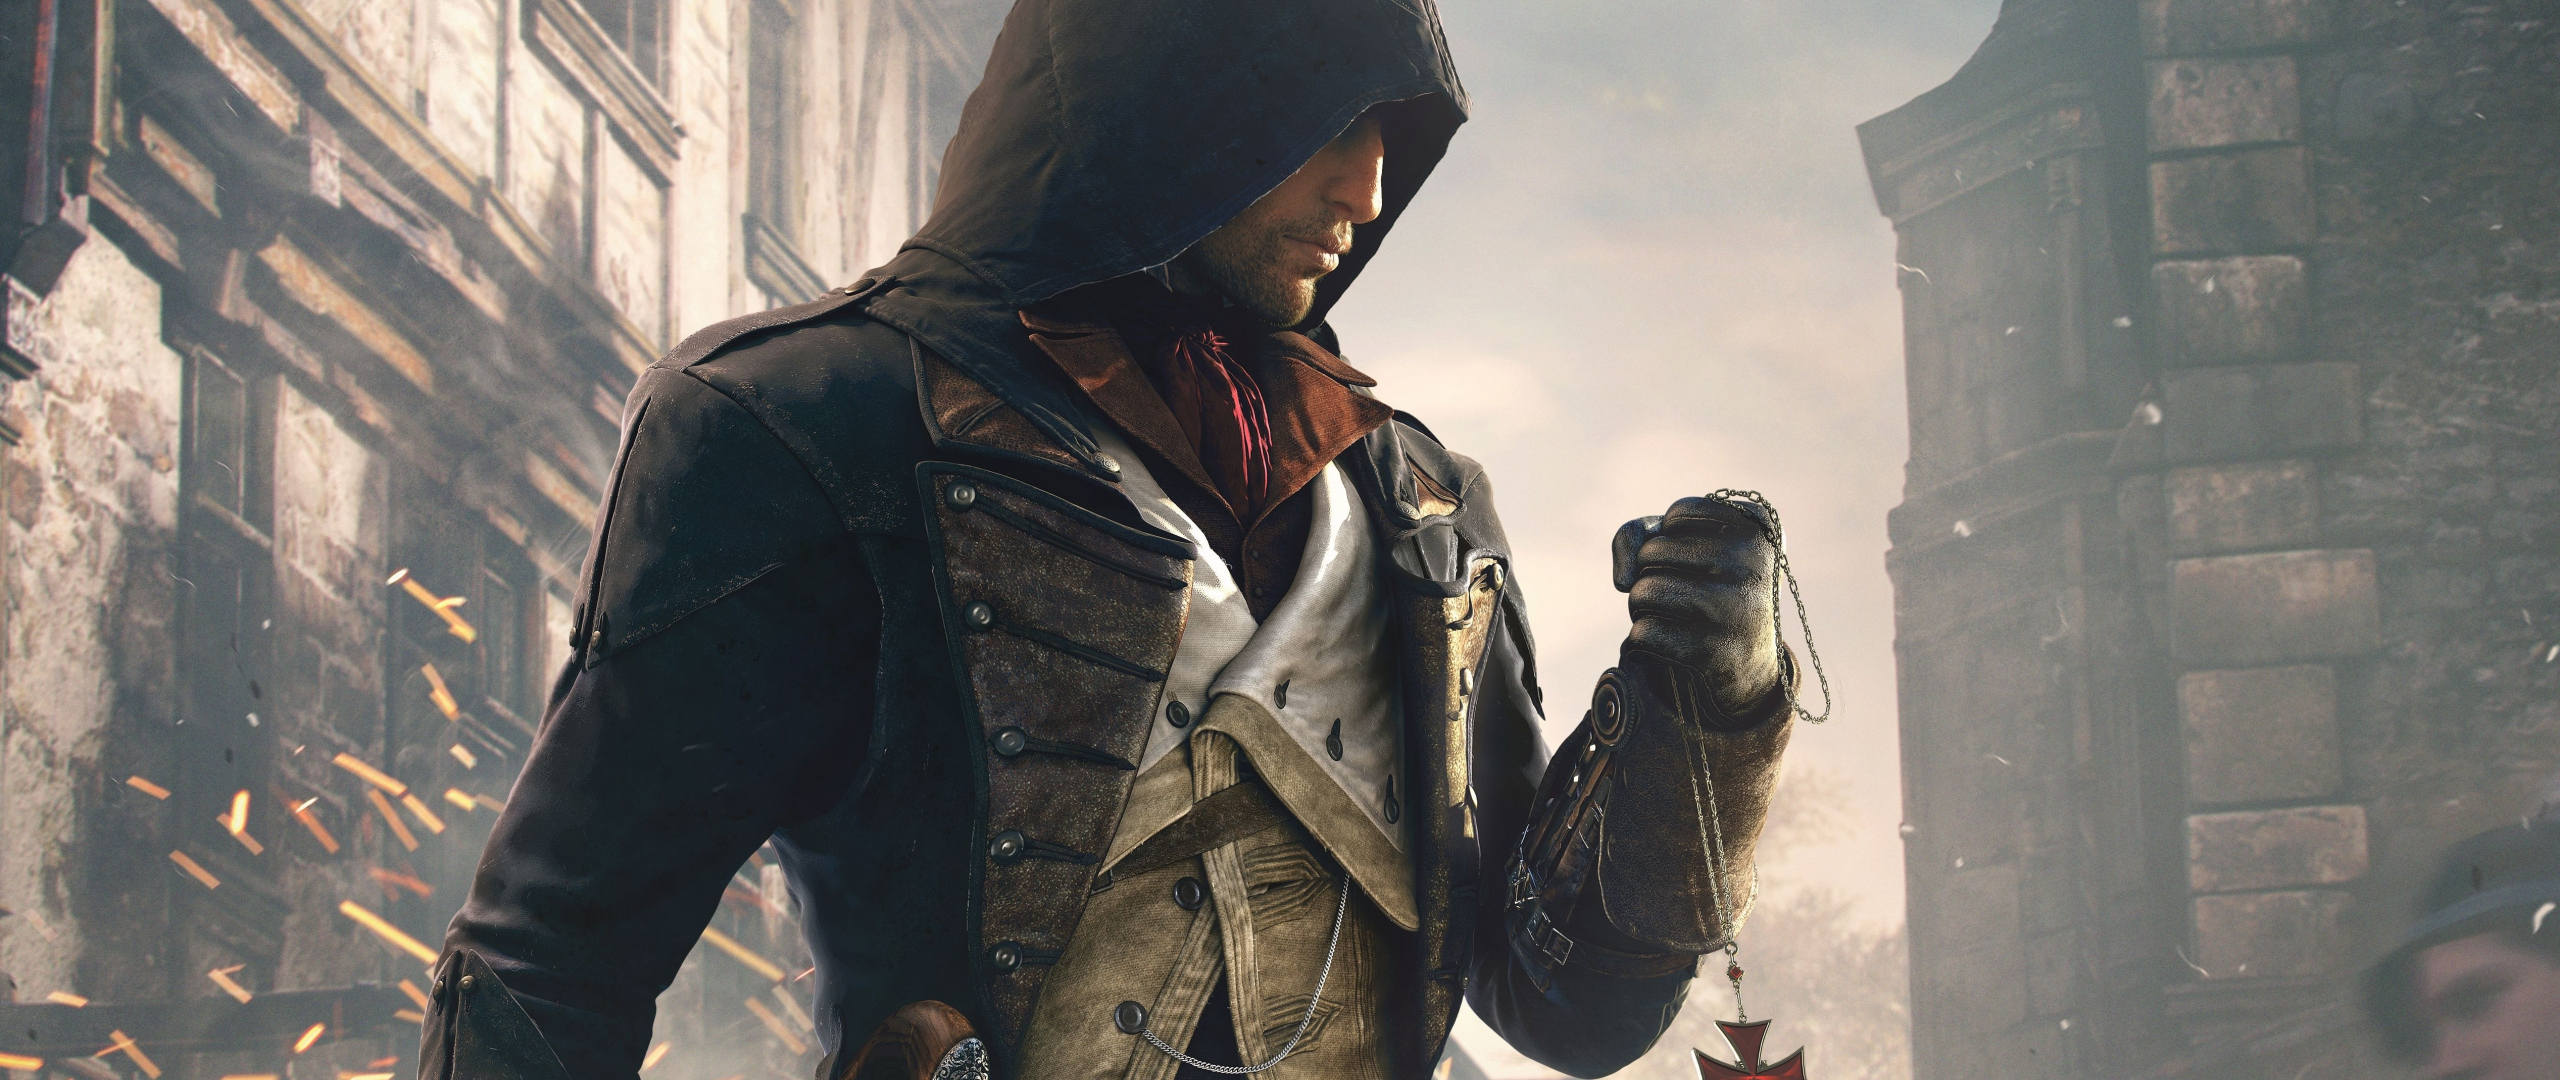 Download wallpaper 2560x1080 assassin's creed unity, video game, dual wide  2560x1080 hd background, 17696